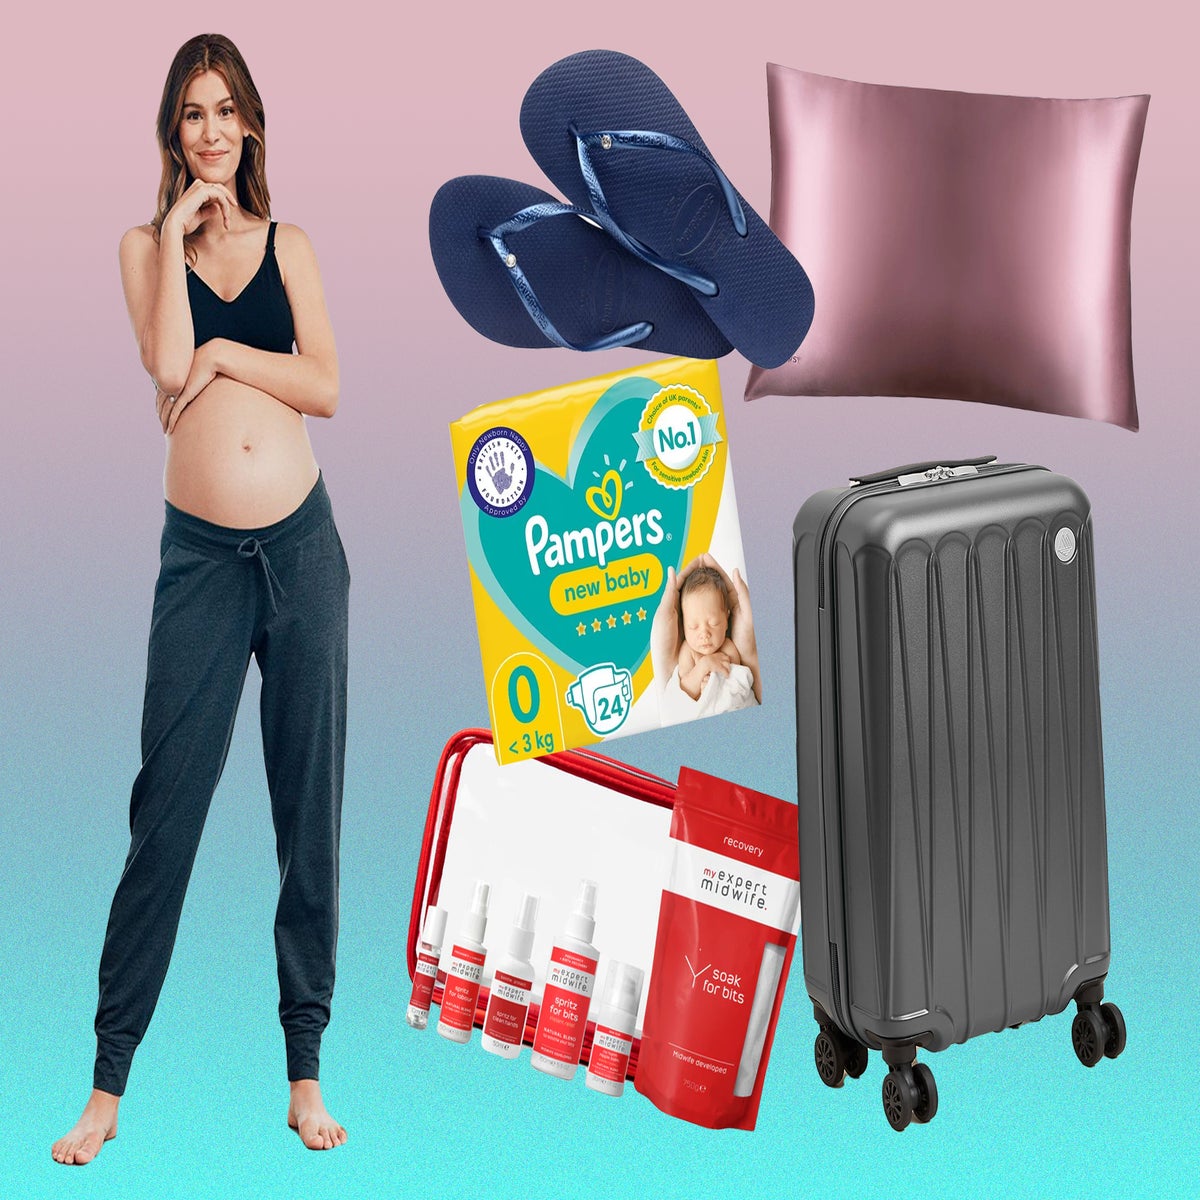 Hospital bag checklist: What essentials and luxuries should I pack for birth?